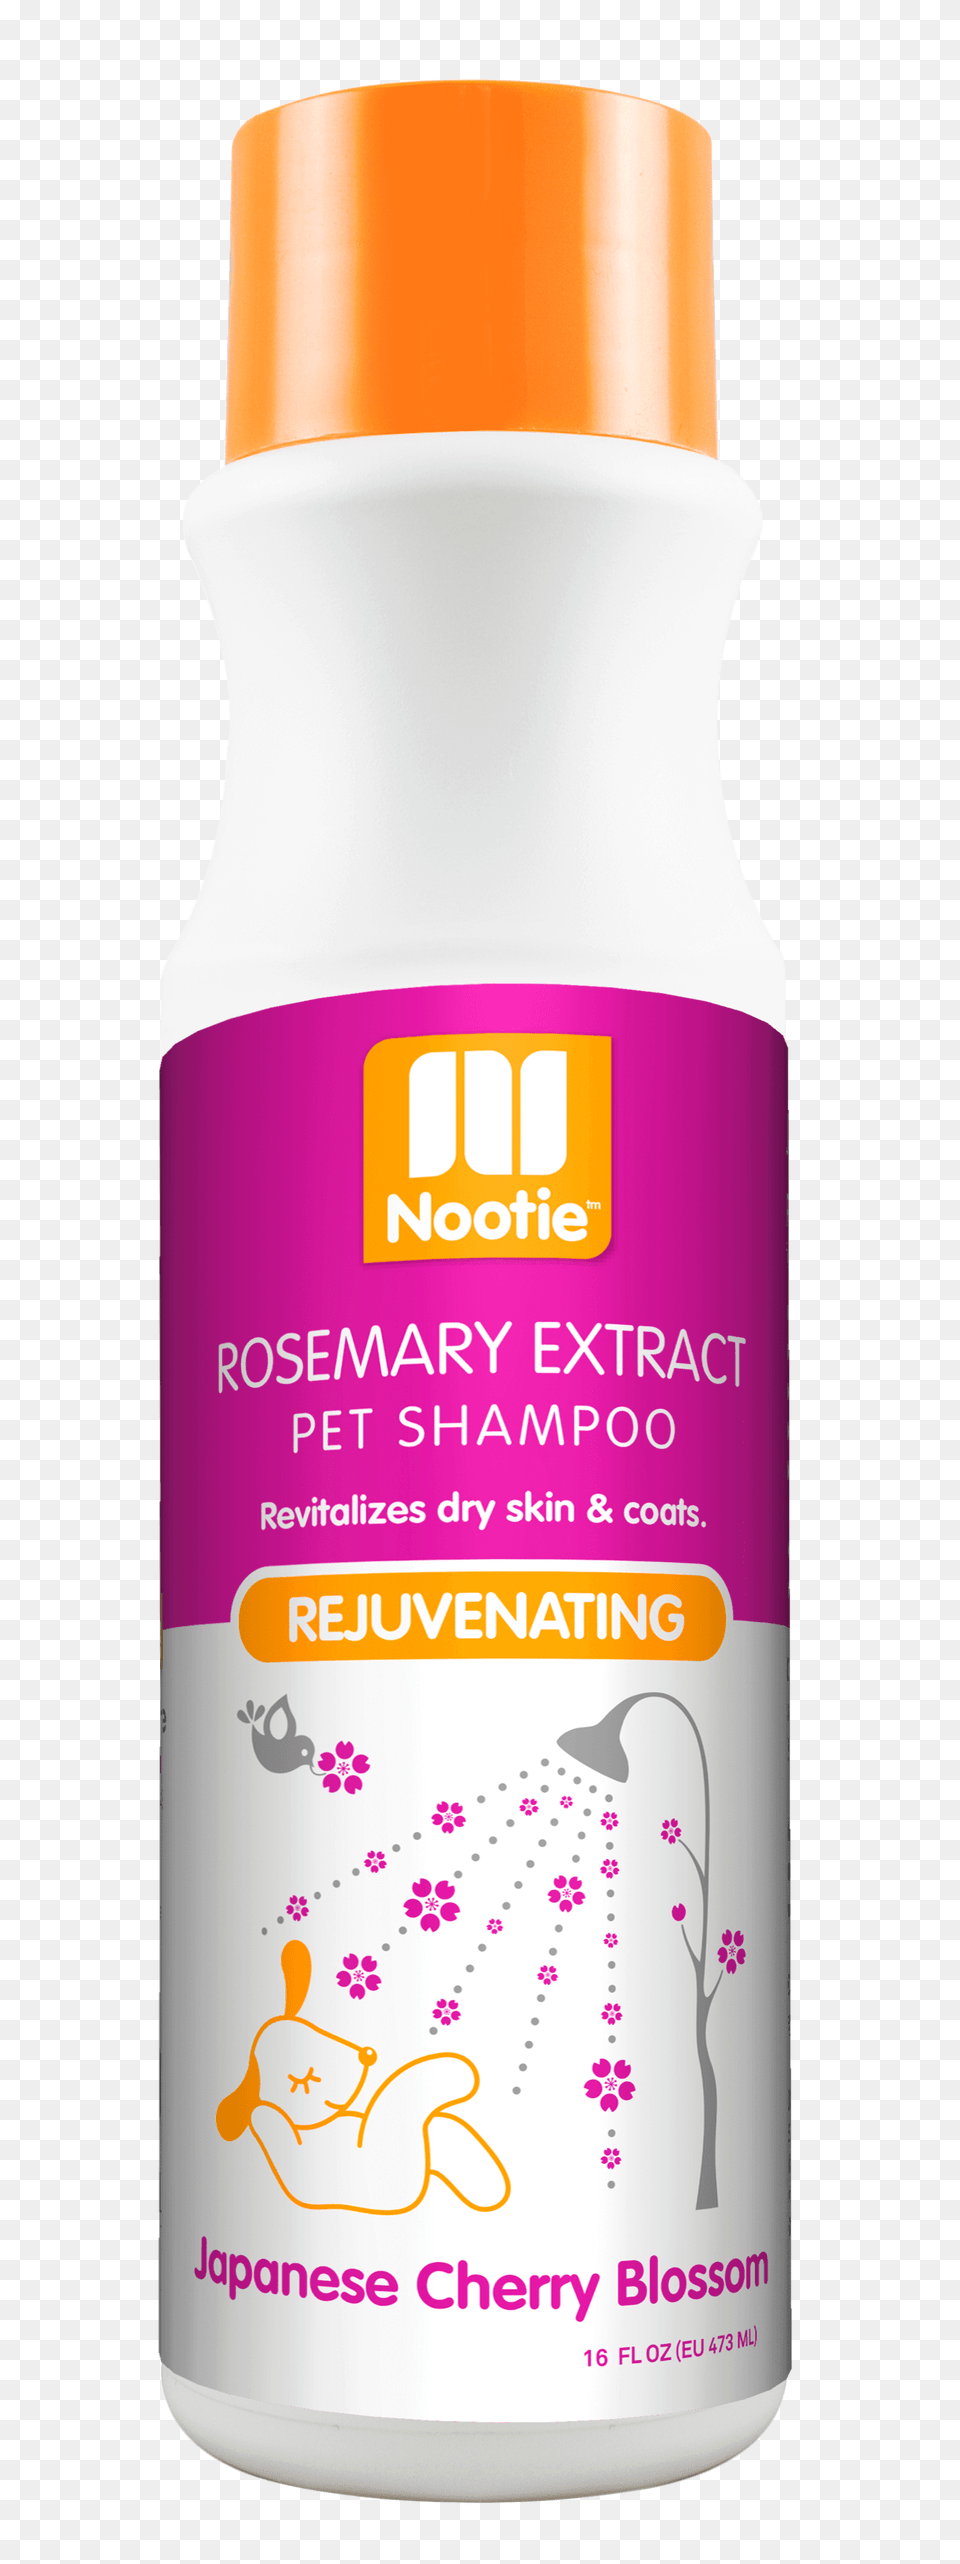 Rejuvenating Shampoo Japanese Cherry Blossom Nootie, Cosmetics, Herbal, Herbs, Plant Png